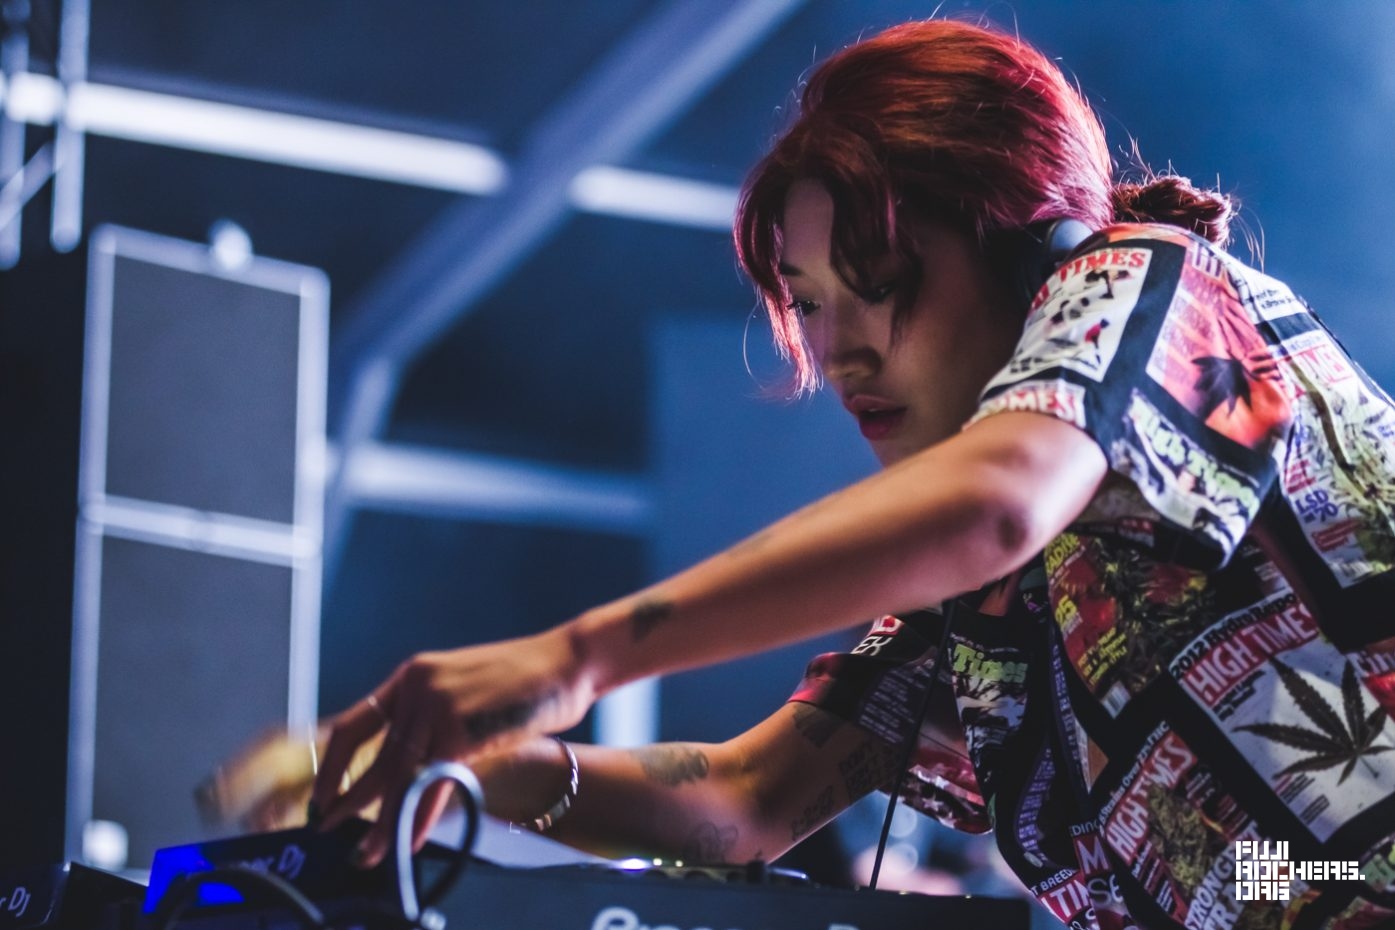 Who is Peggy Gou? - Exron Music